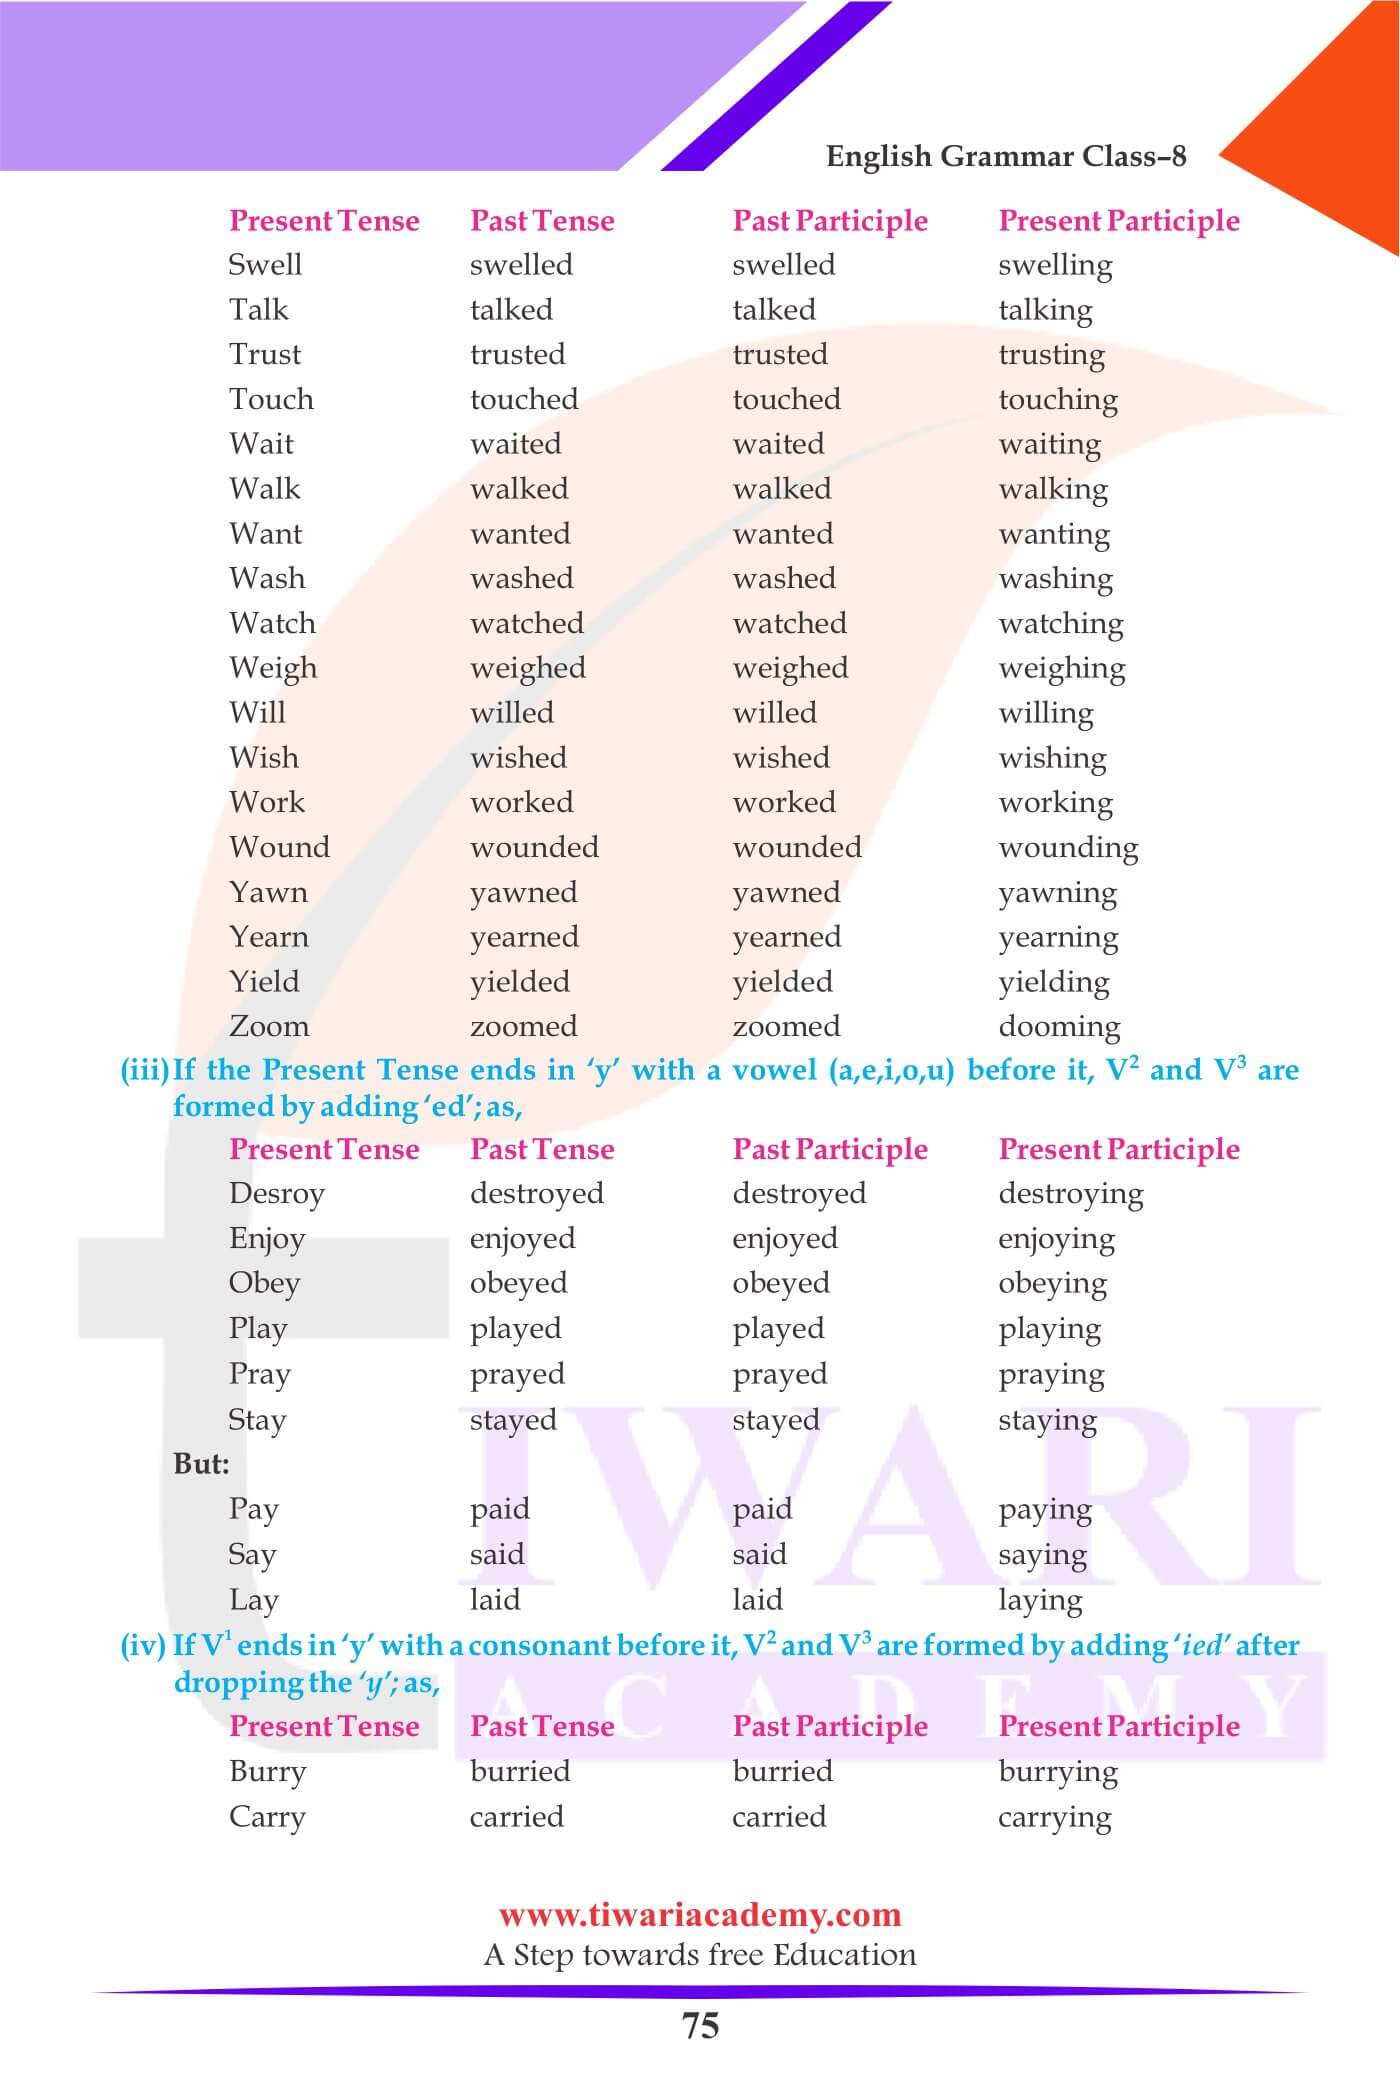 Class 8 English Grammar Chapter 6 The Verb for Session 2023-24.